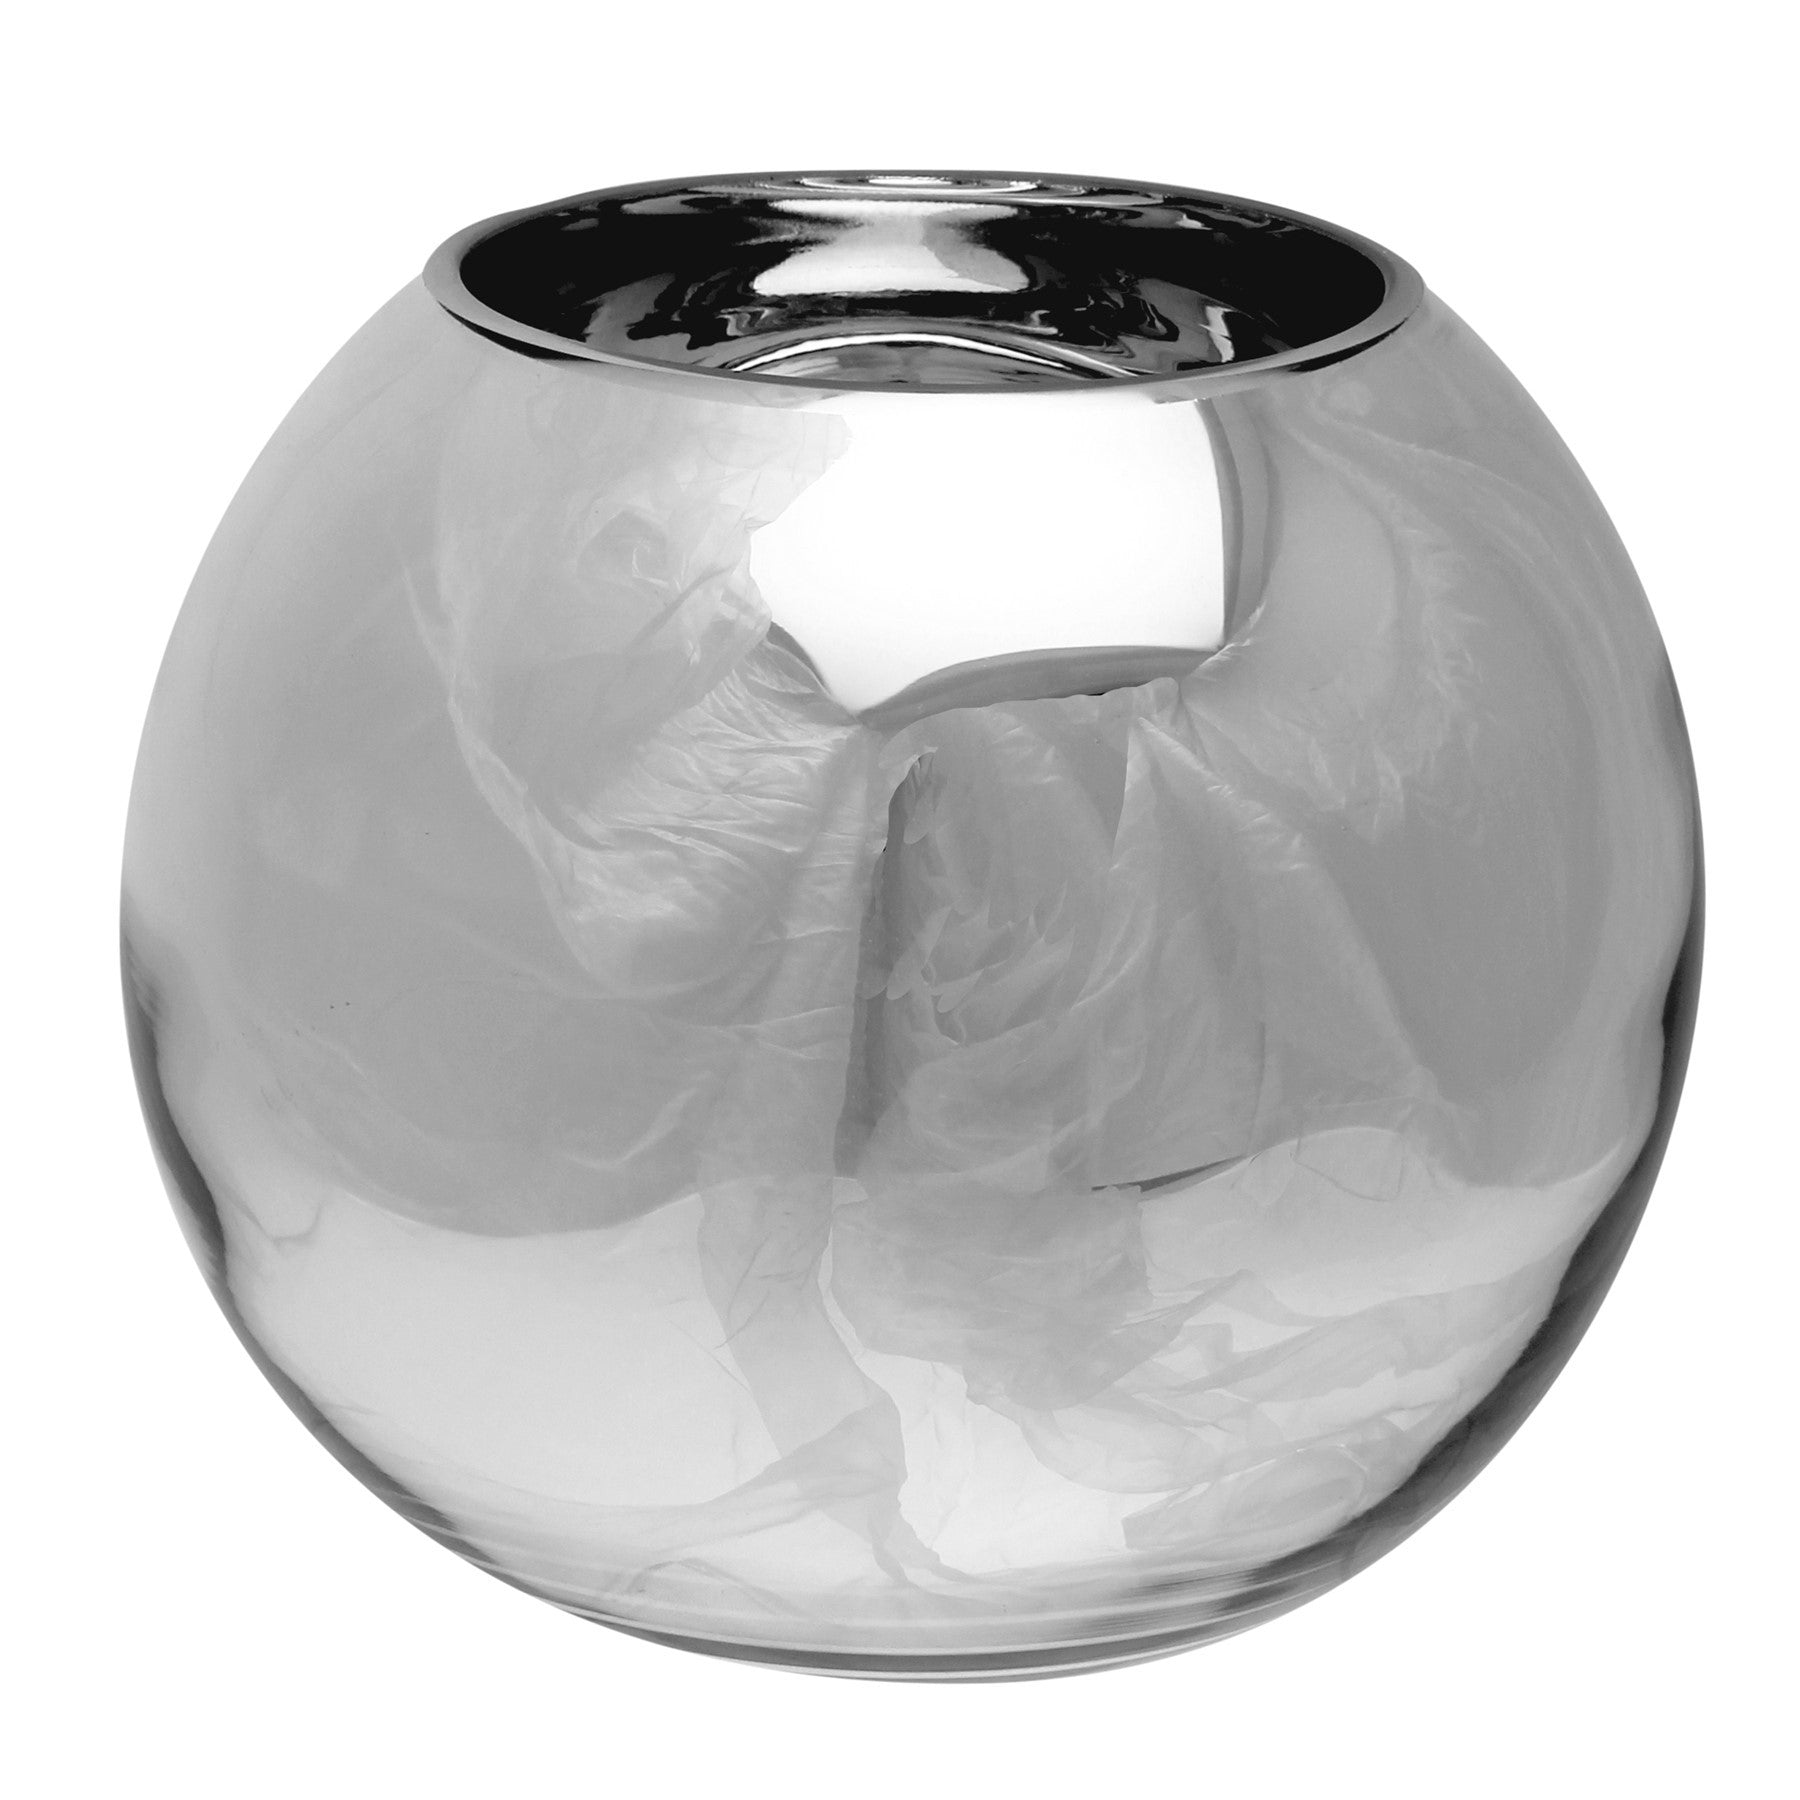 View Mirror Bubble Ball 8 Inch information